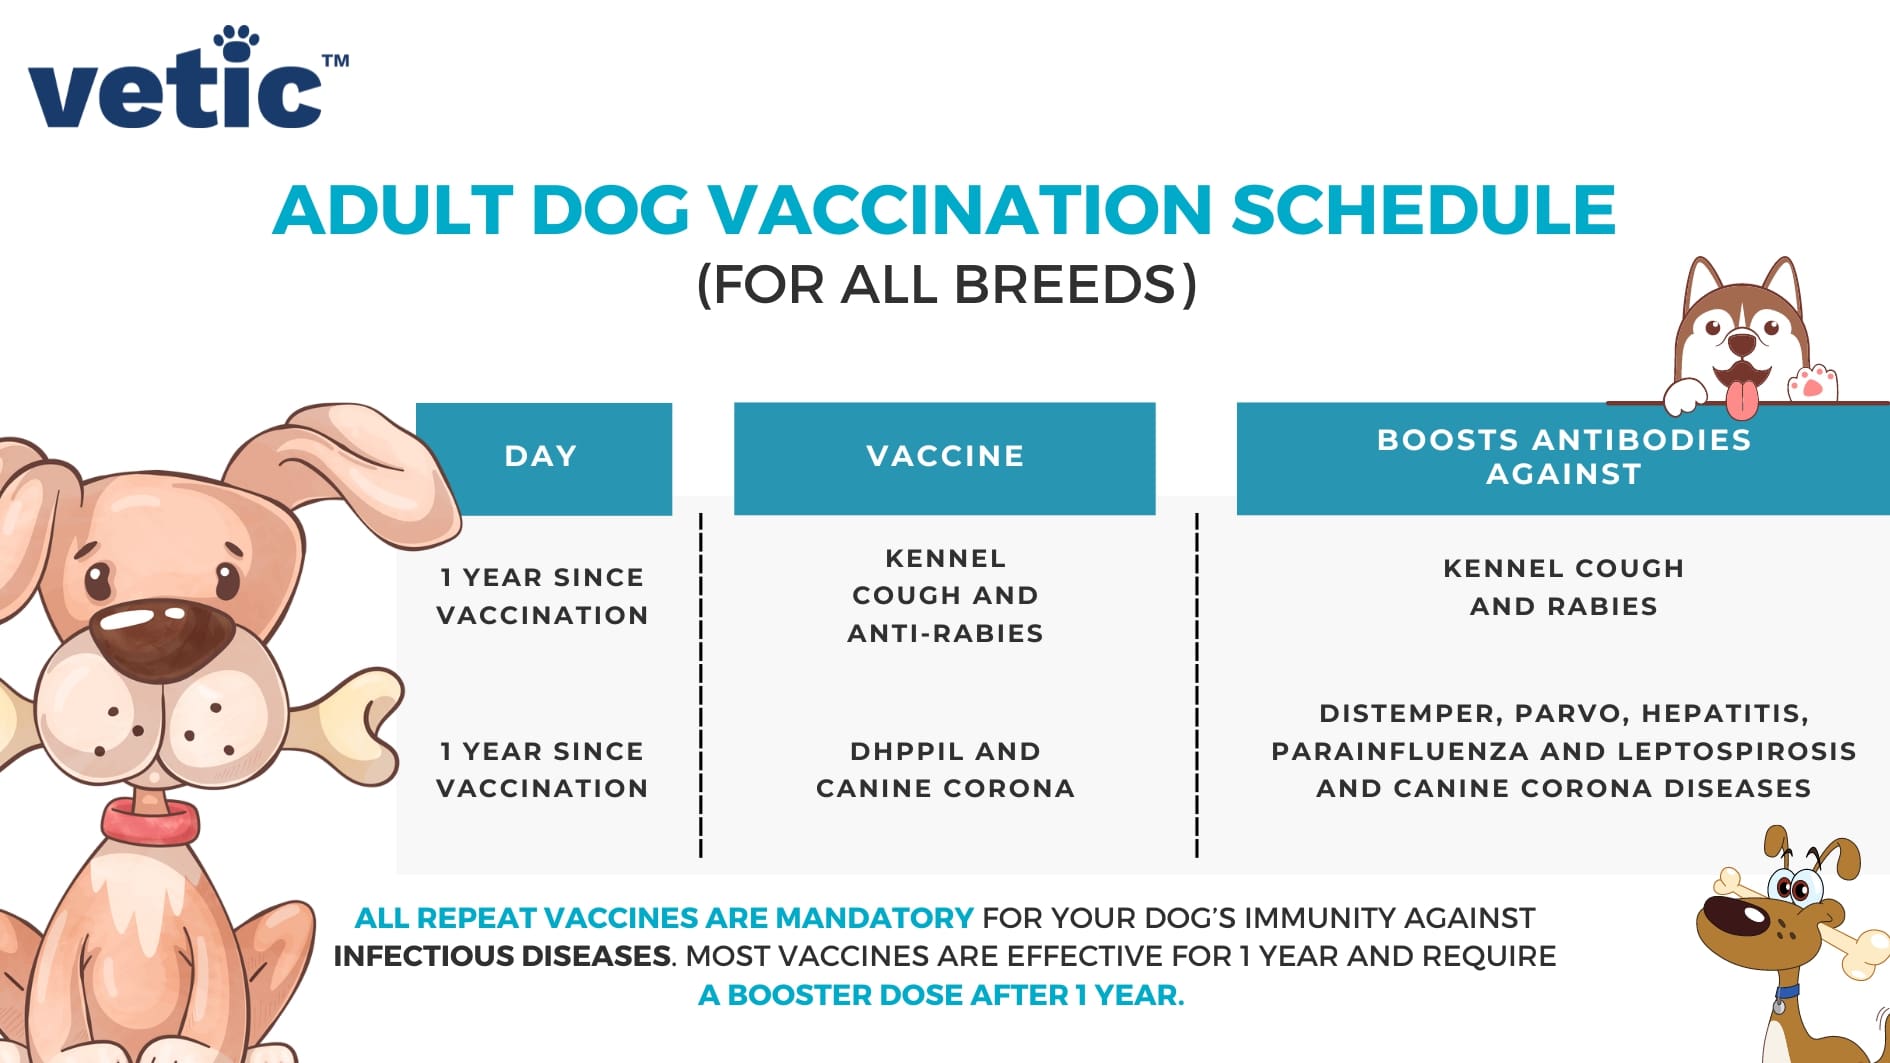 The complete mandatory vaccination schedule for dogs of all breeds. Your adult dog needs boosters for anti-rabies, kennel cough. You should contact the veterinary clinic near you, such as Vetic Thane or Vetic Clinic Andheri for a proper tailored puppy and dog vaccination schedule.